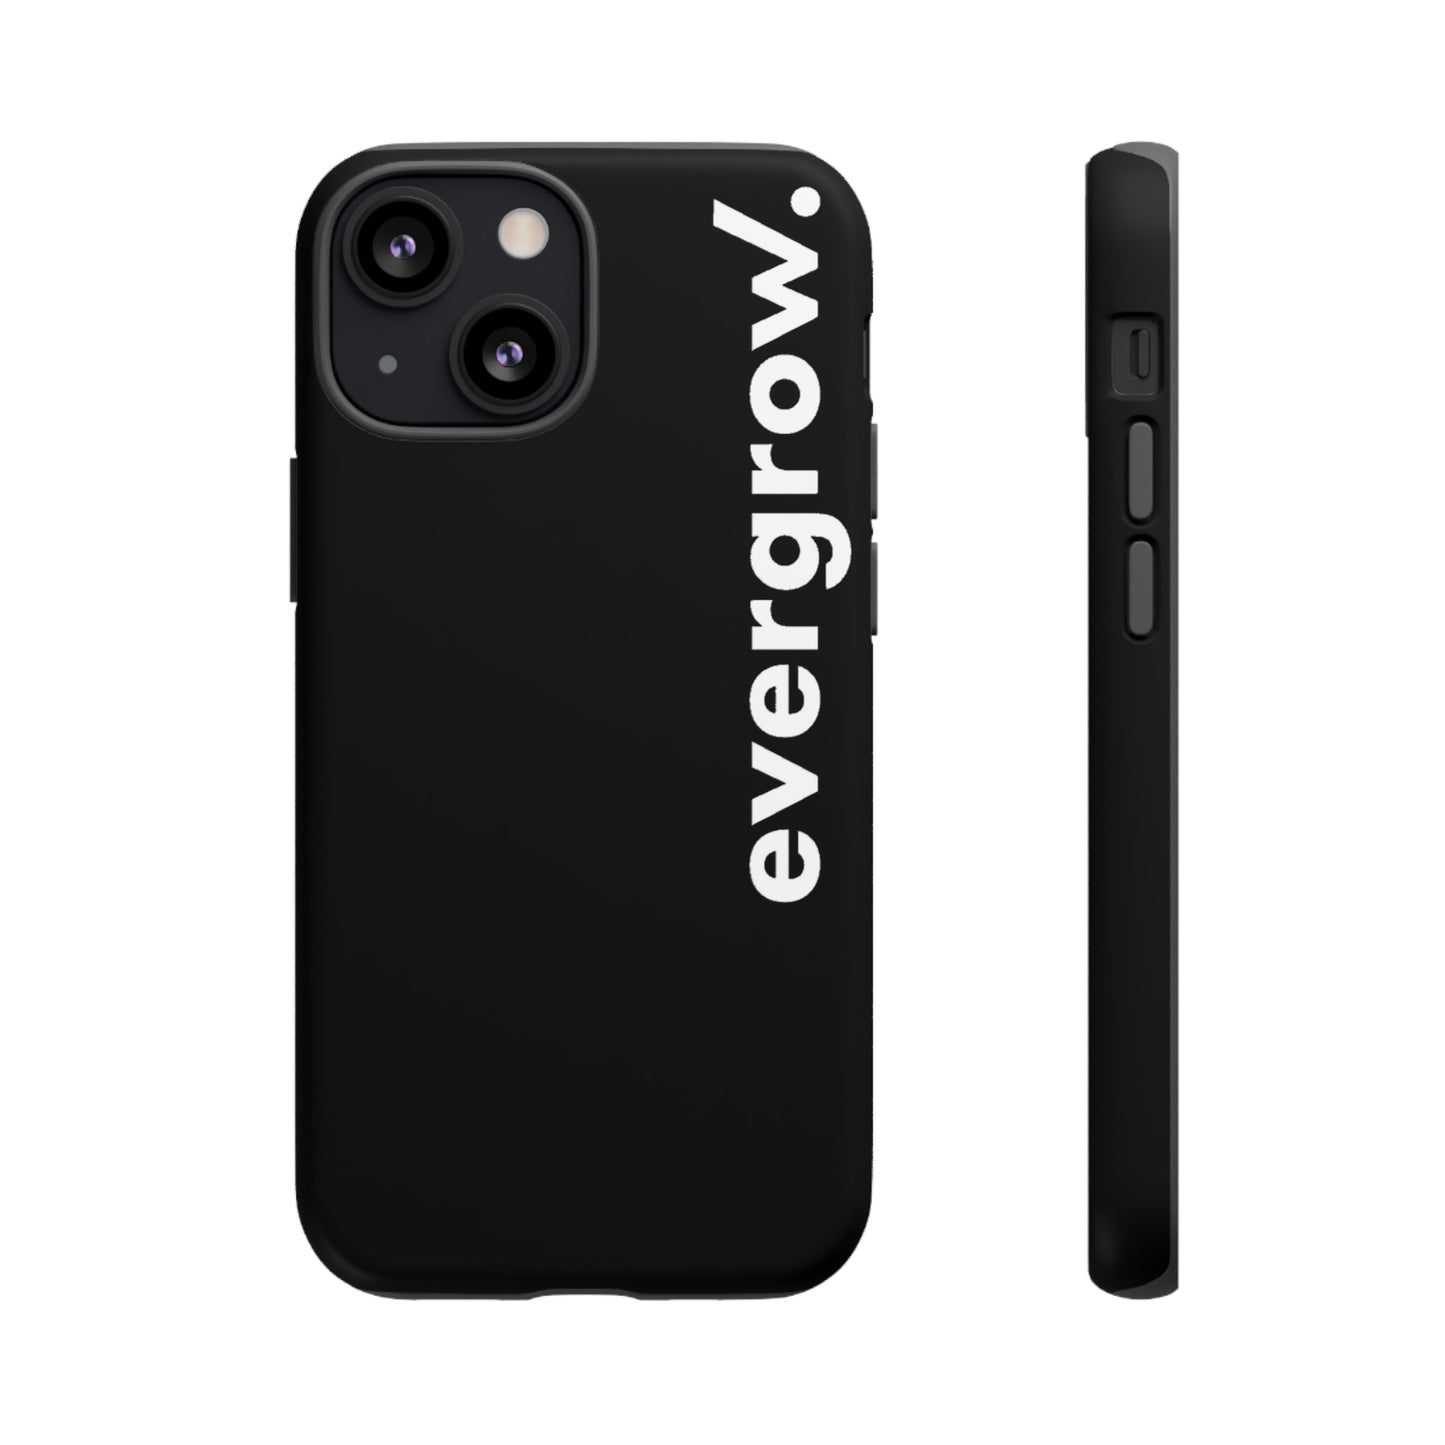 Worldwide - Tough Cases with case in black and white evergrow lettering